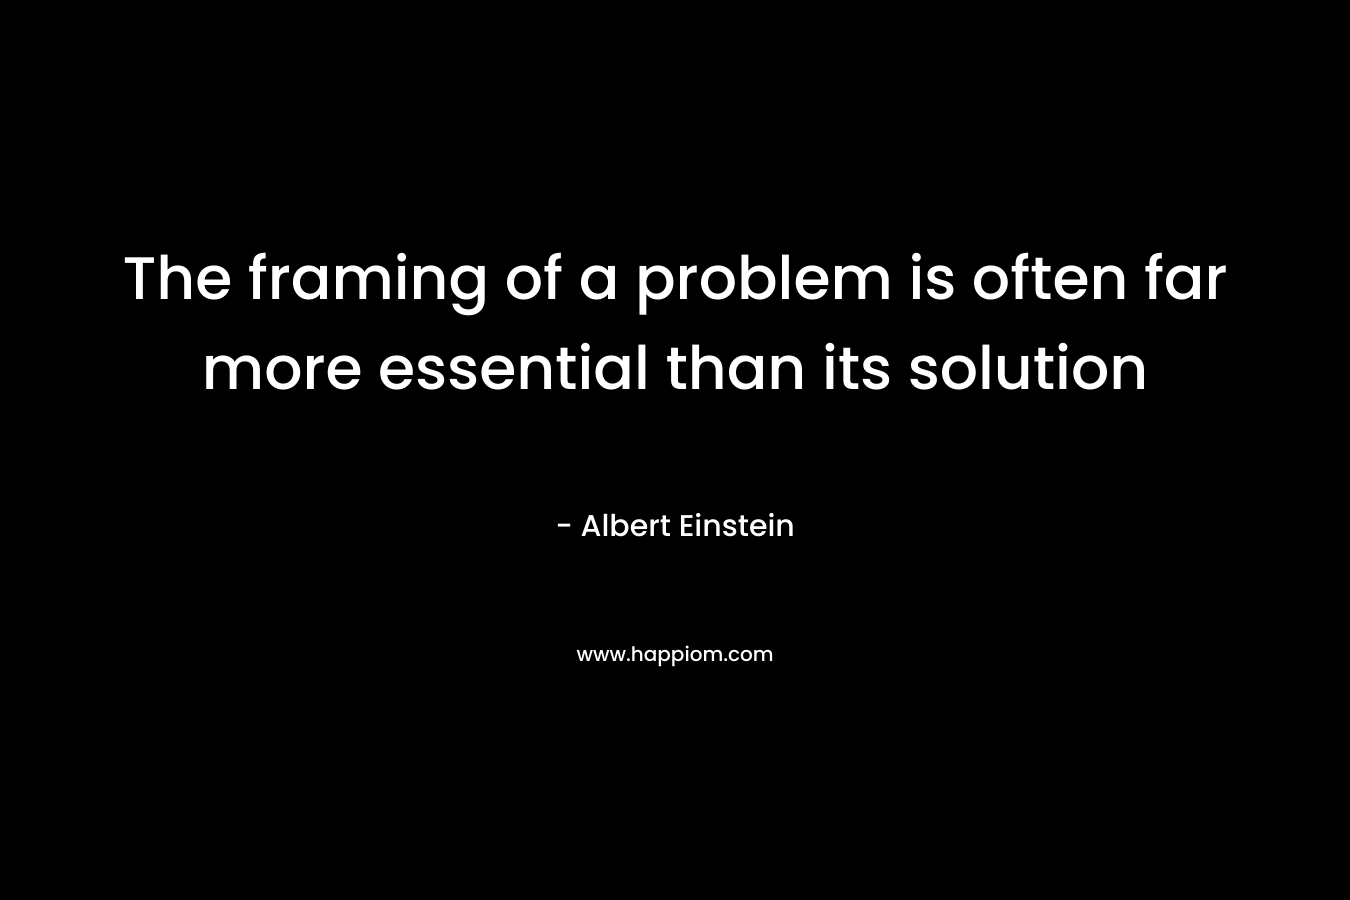 The framing of a problem is often far more essential than its solution